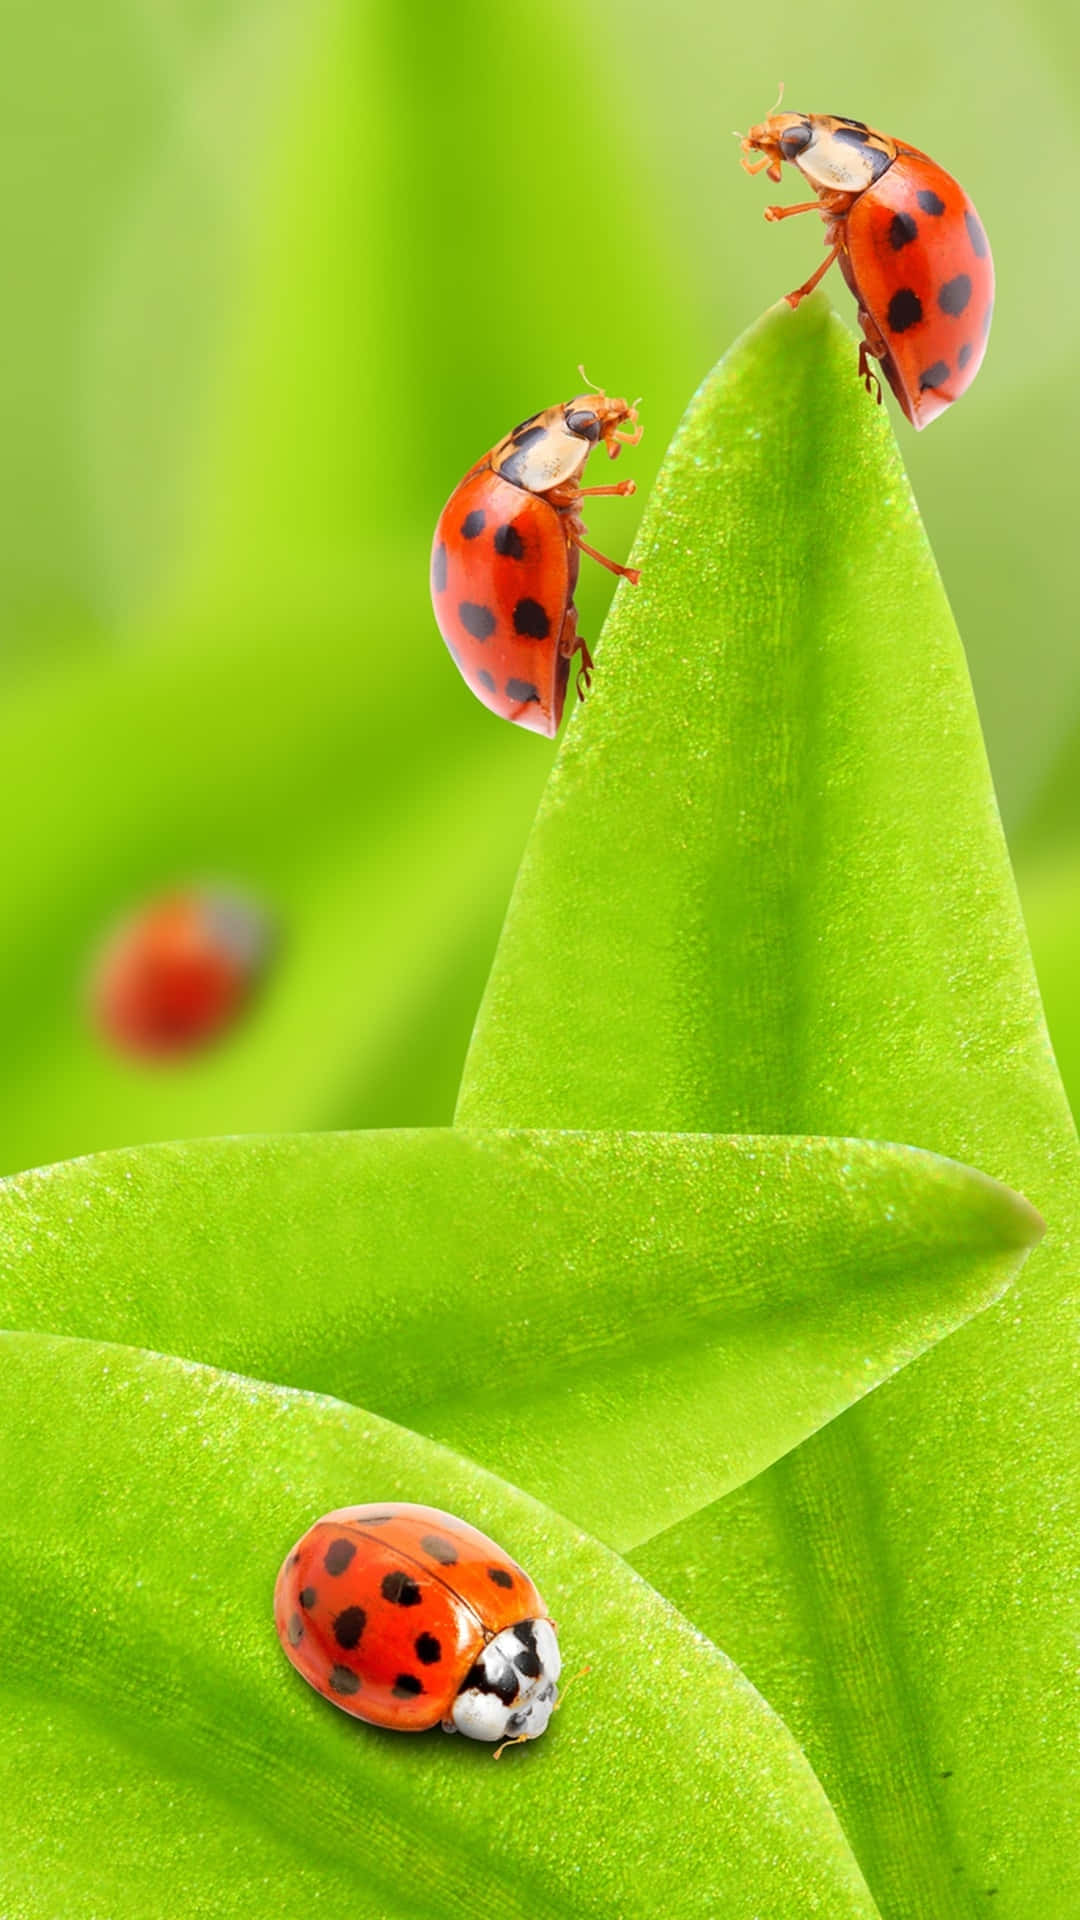 Add an Eye-catching design to your phone with this Ladybug Iphone wallpaper! Wallpaper